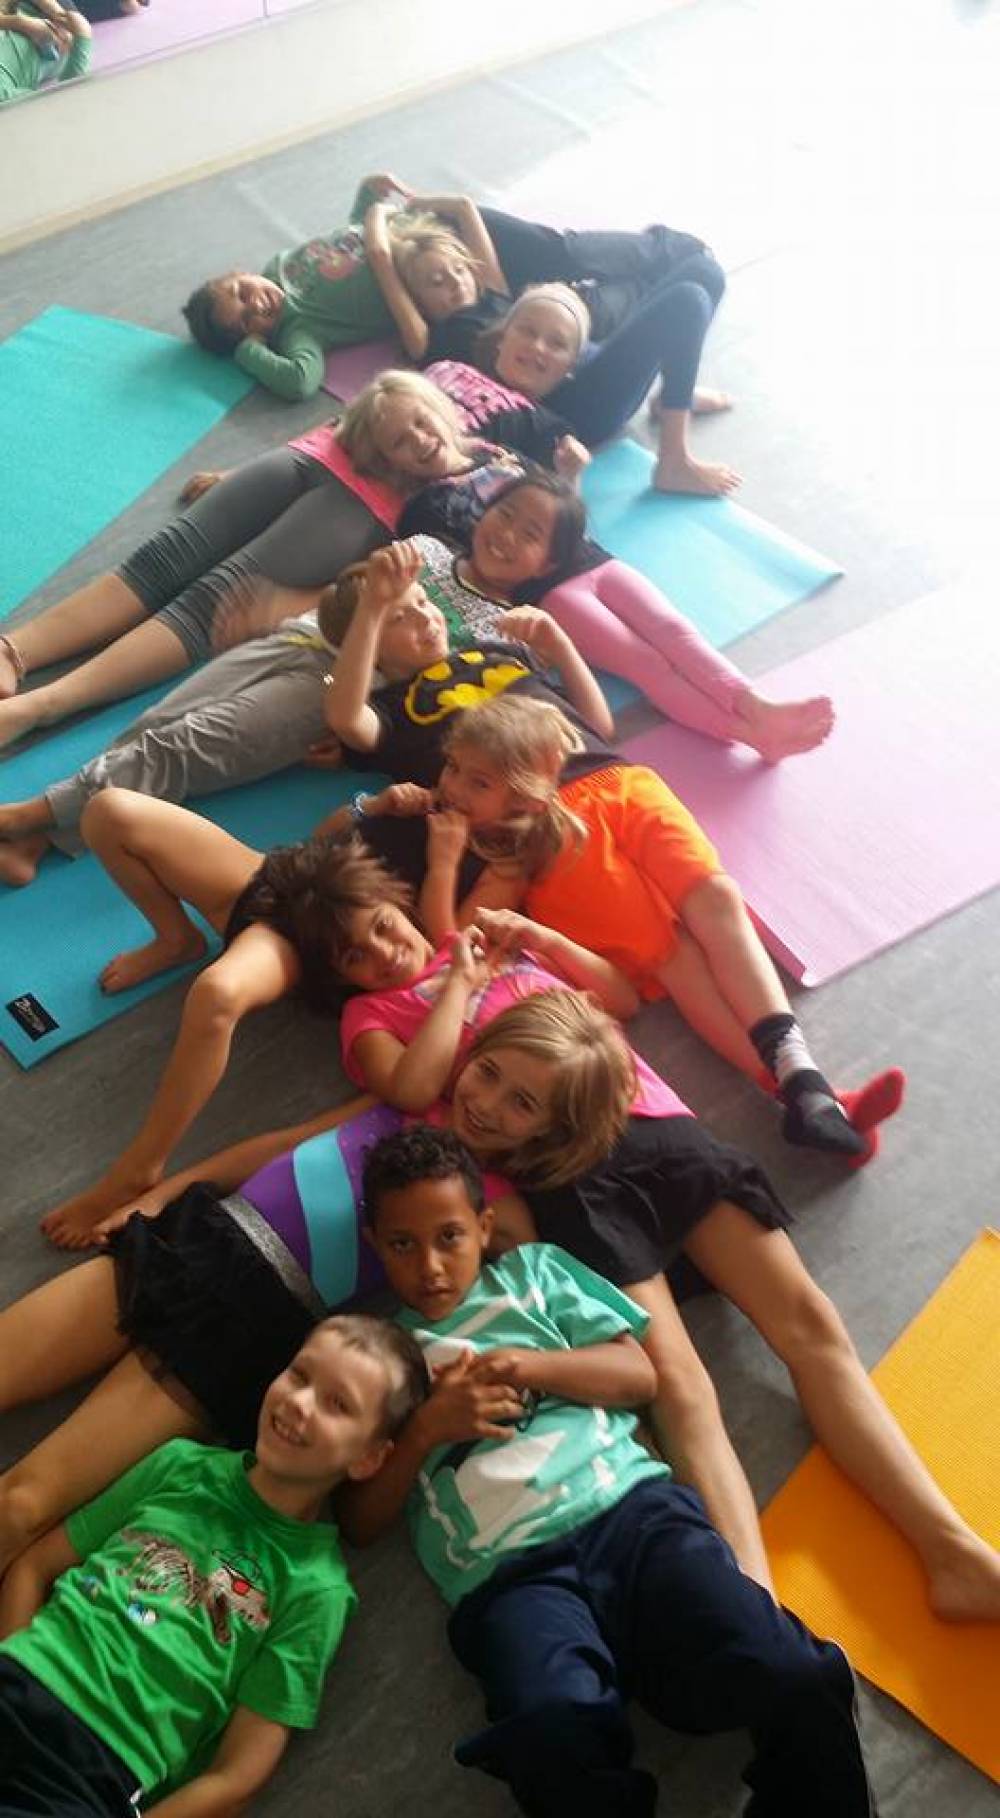 TOP MINNESOTA SUMMER CAMP: Camp JUST DANCE at Dance-N-Magic is a Top Summer Camp located in St. Paul Minnesota offering many fun and enriching camp programs. 